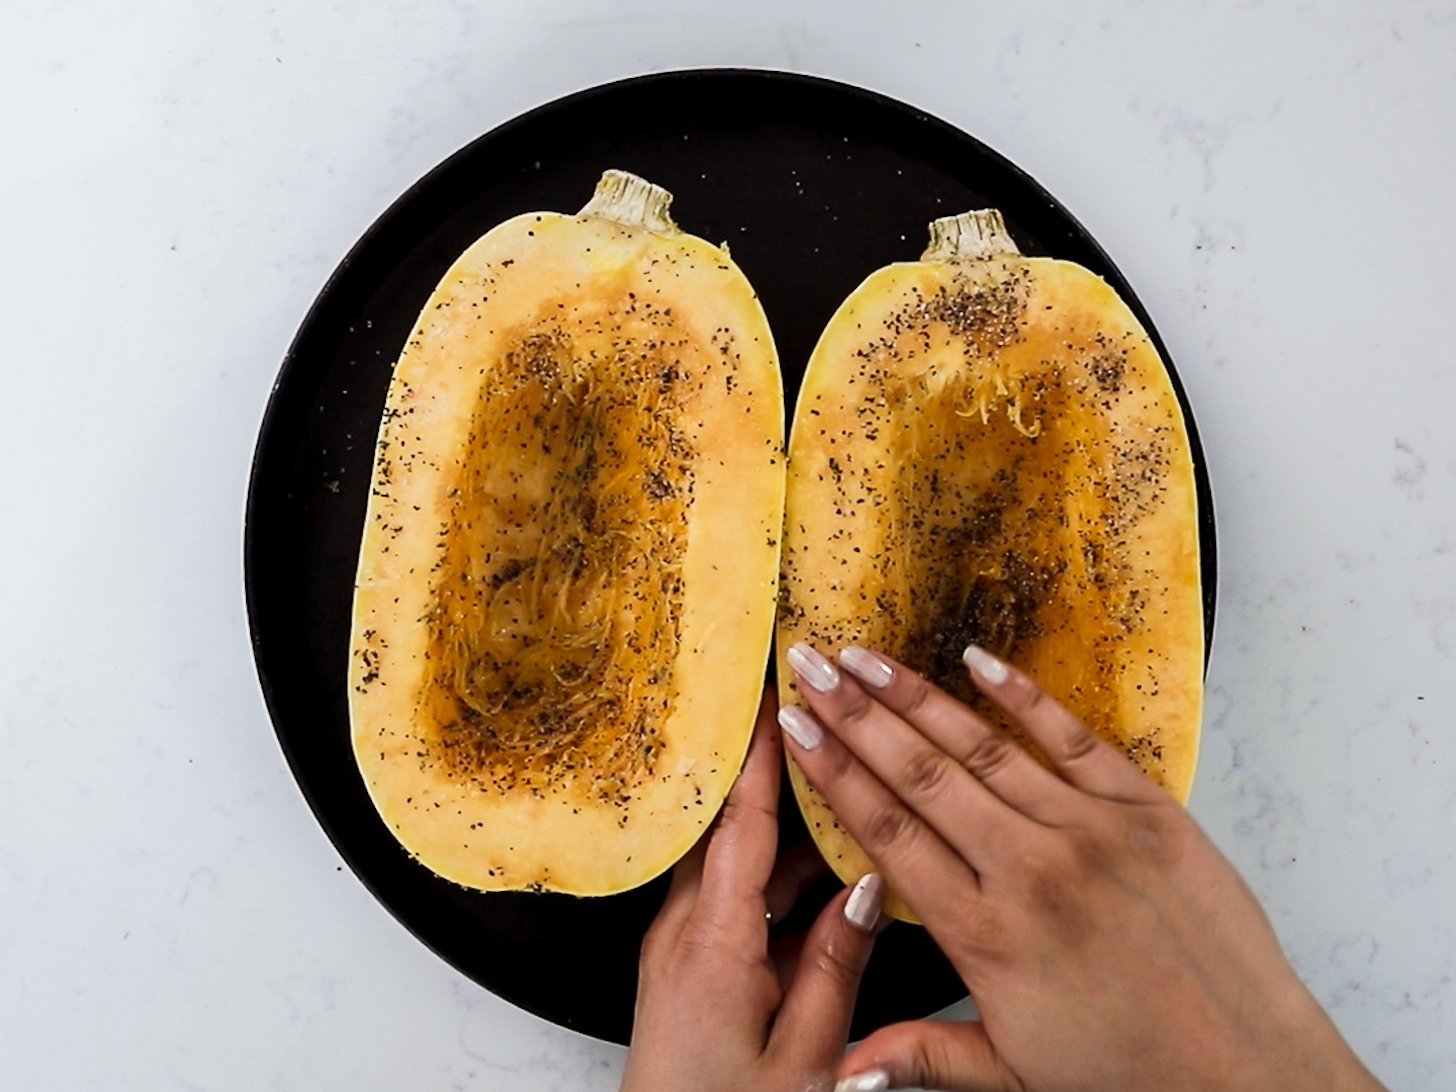 Hands spreading oil, salt and pepper over one half of a spaghetti squash.